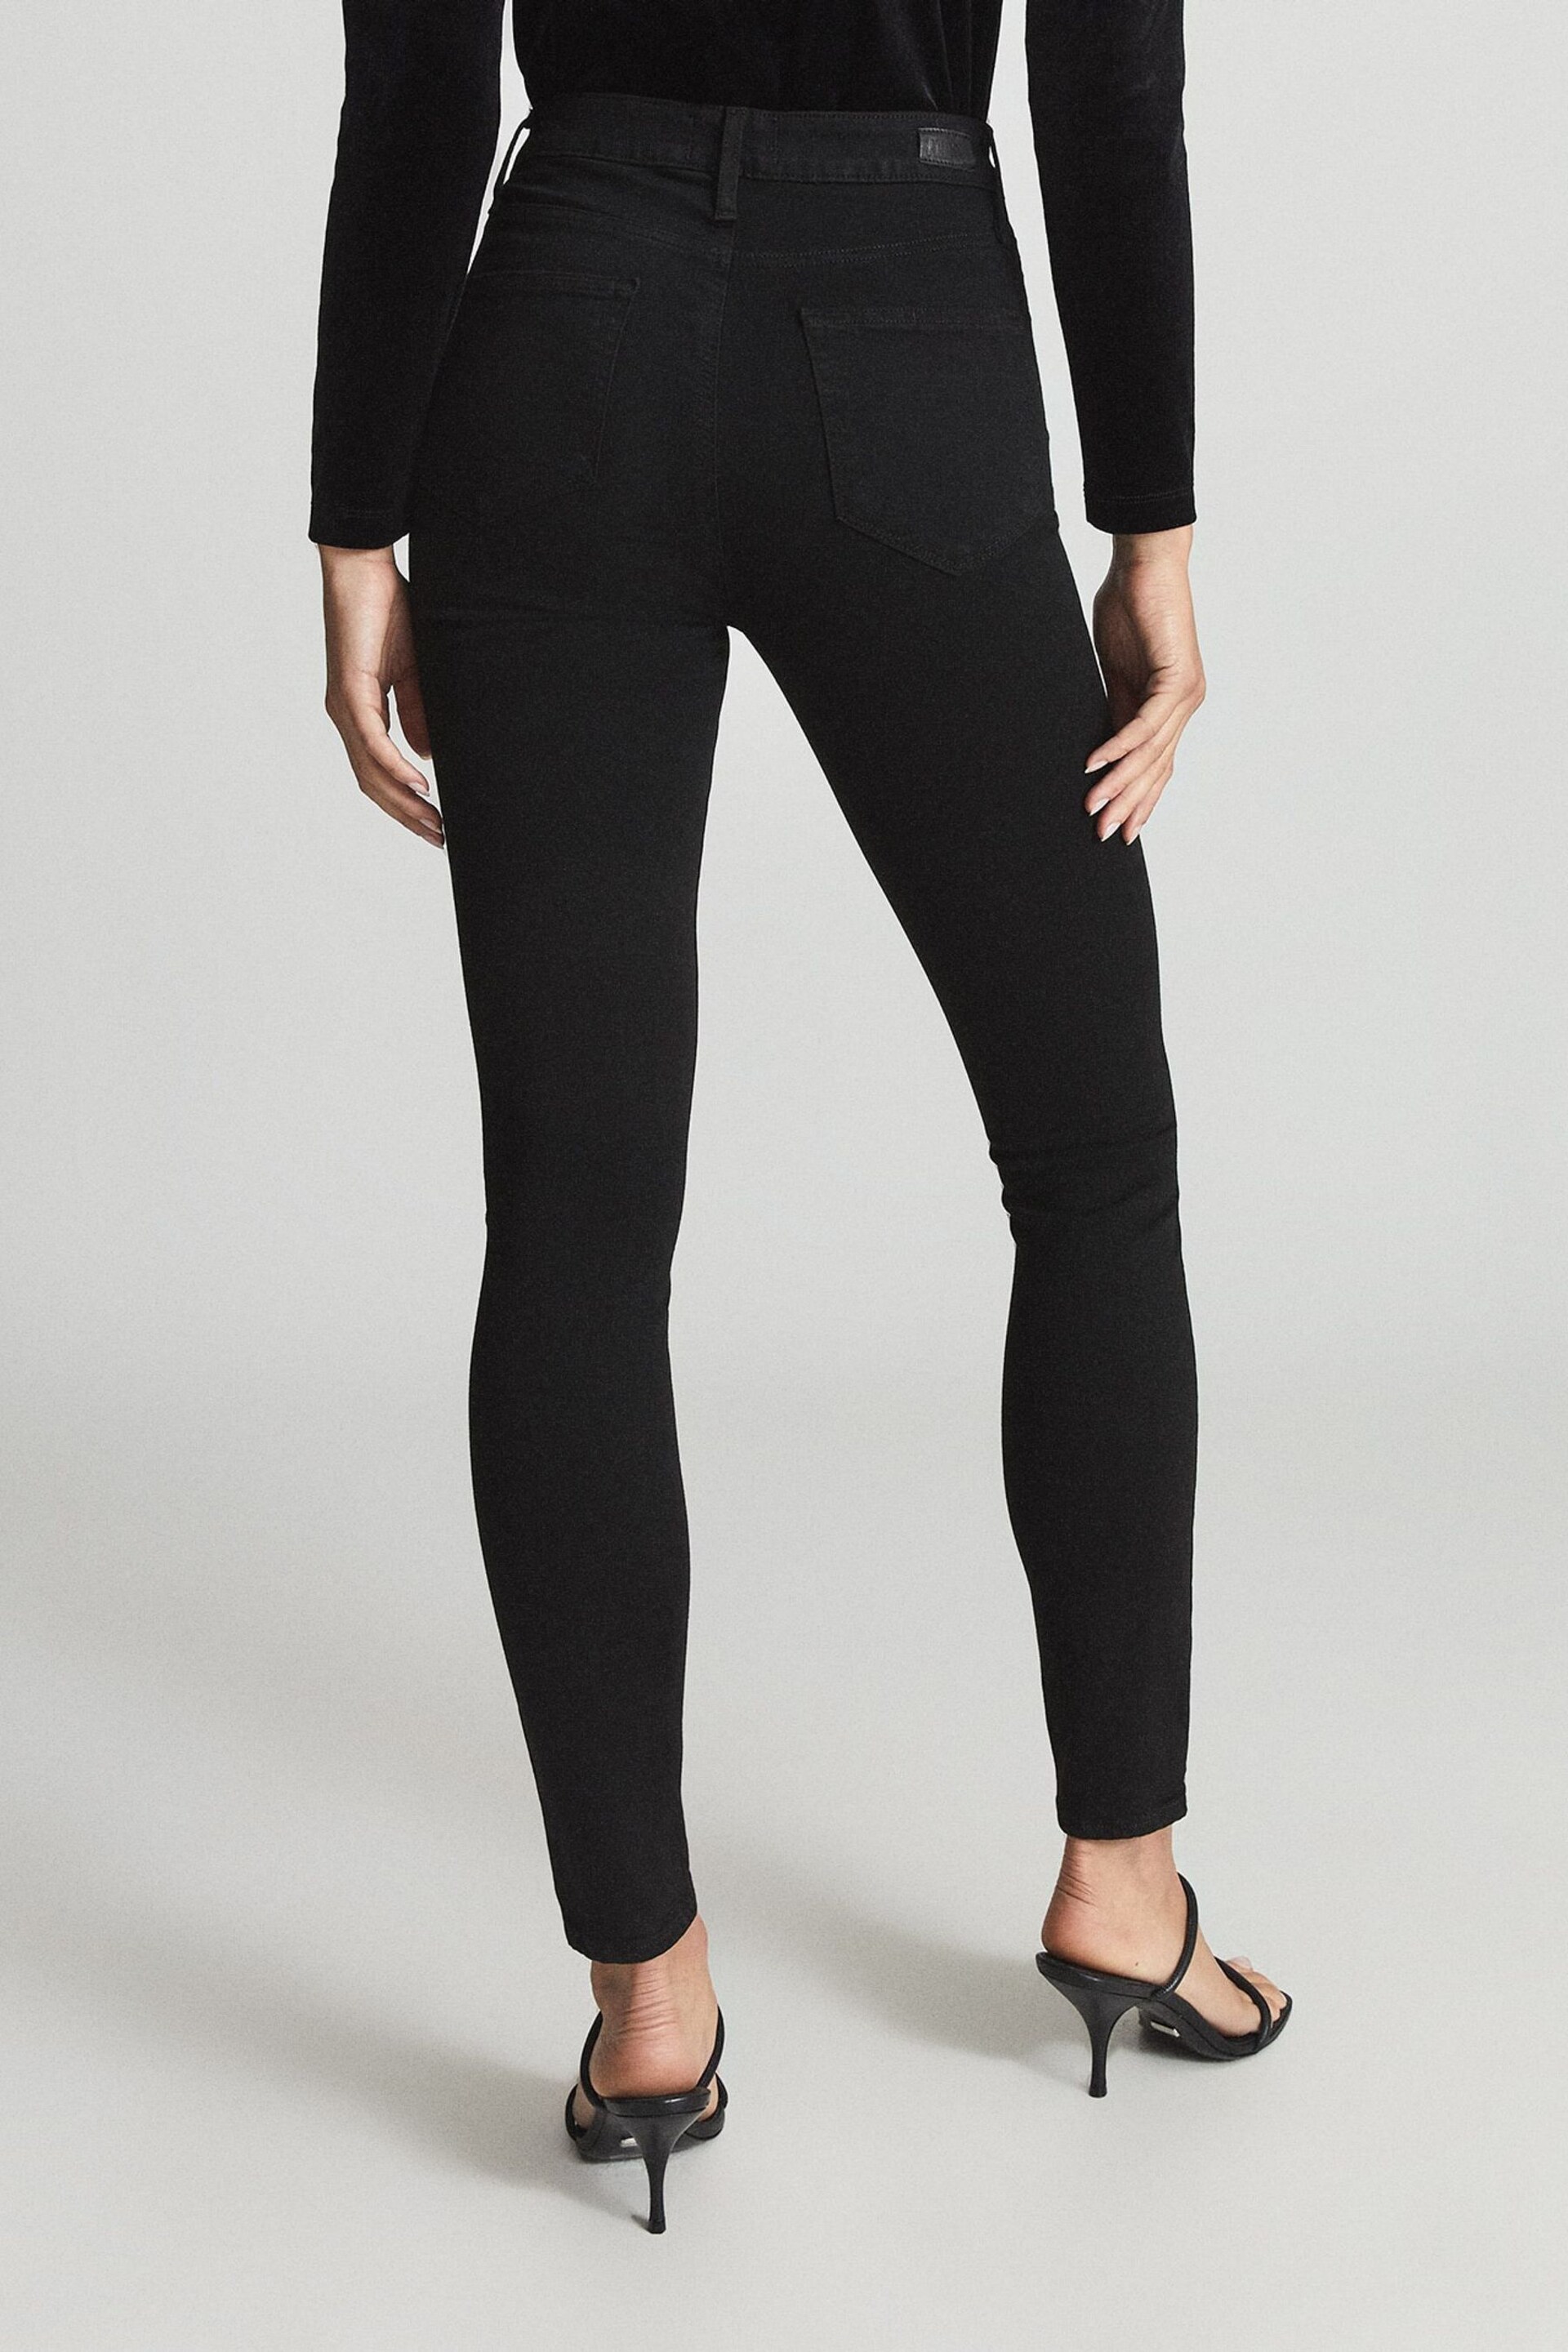 Paige Margot Ultra Skinny High Waisted Jeans - Image 2 of 6